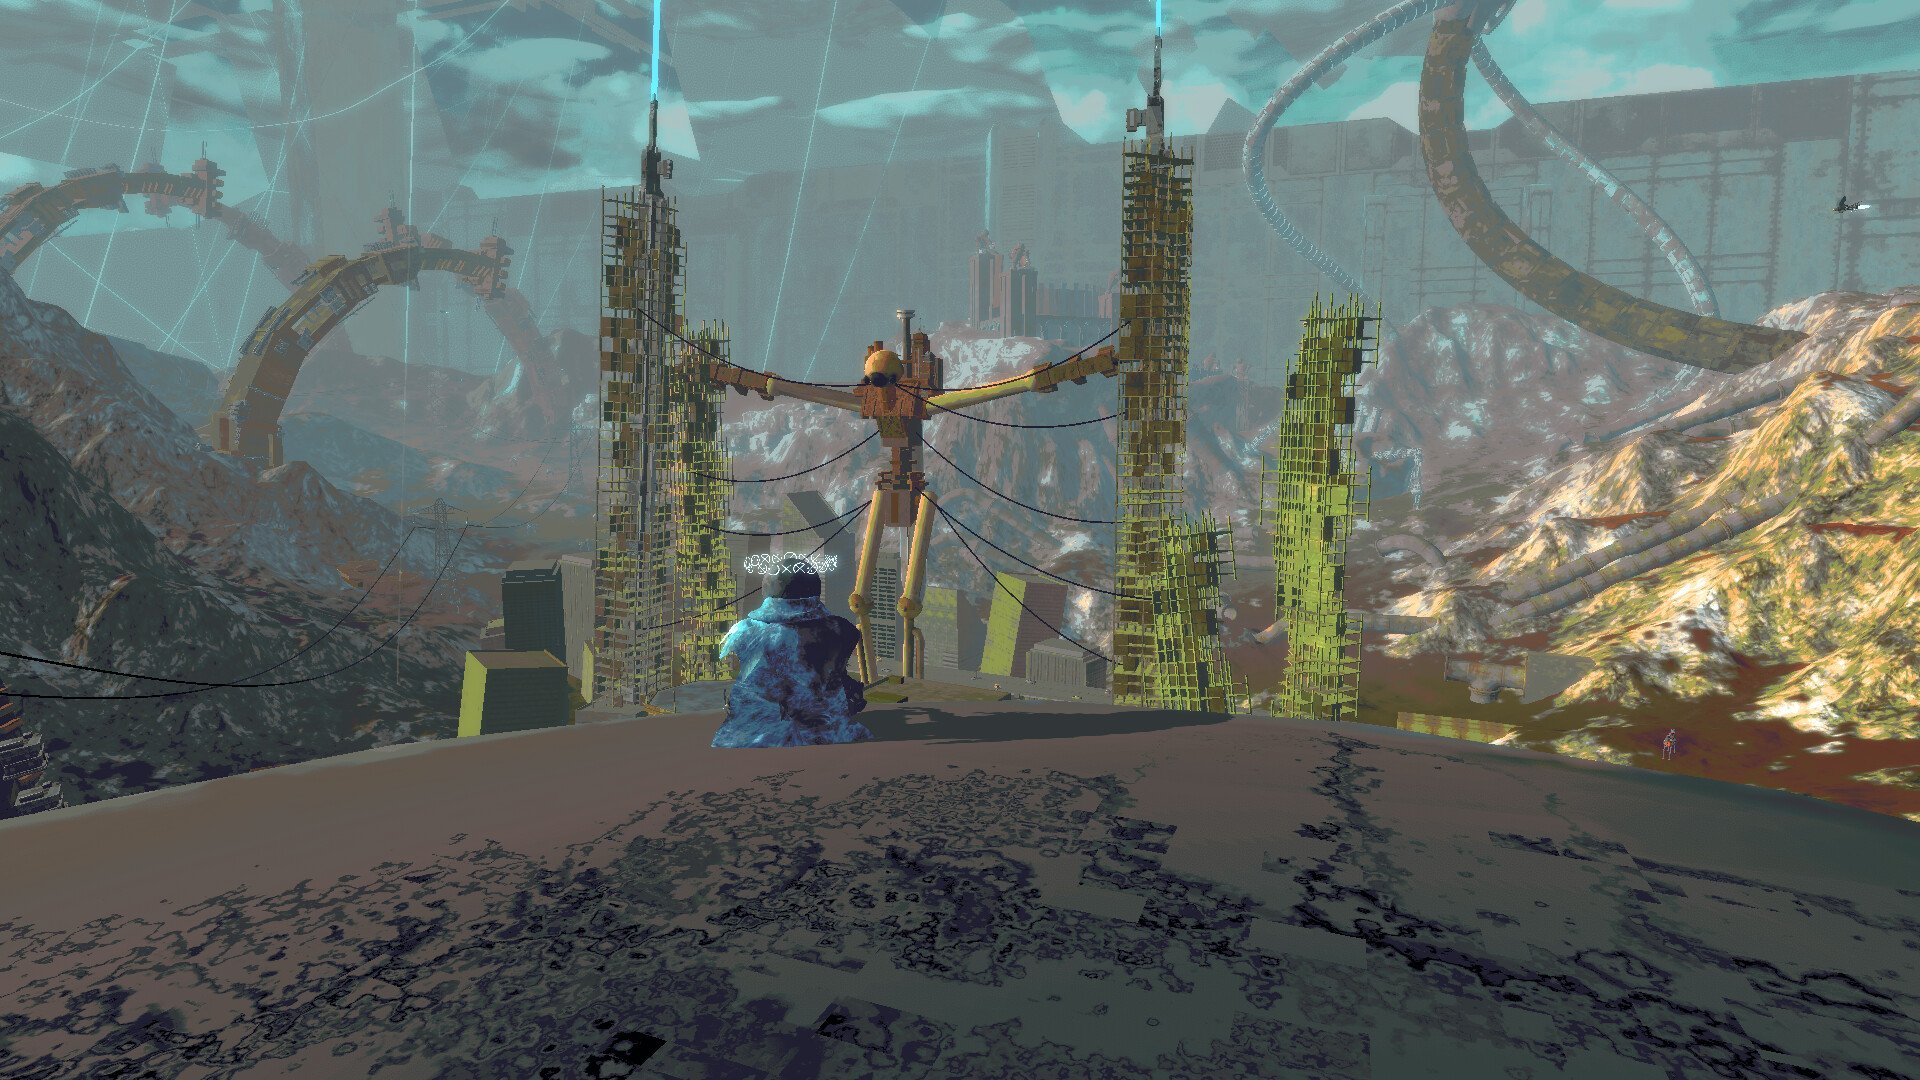 a machine overlooking decaying megastructure. image is from game V.A Proxy.